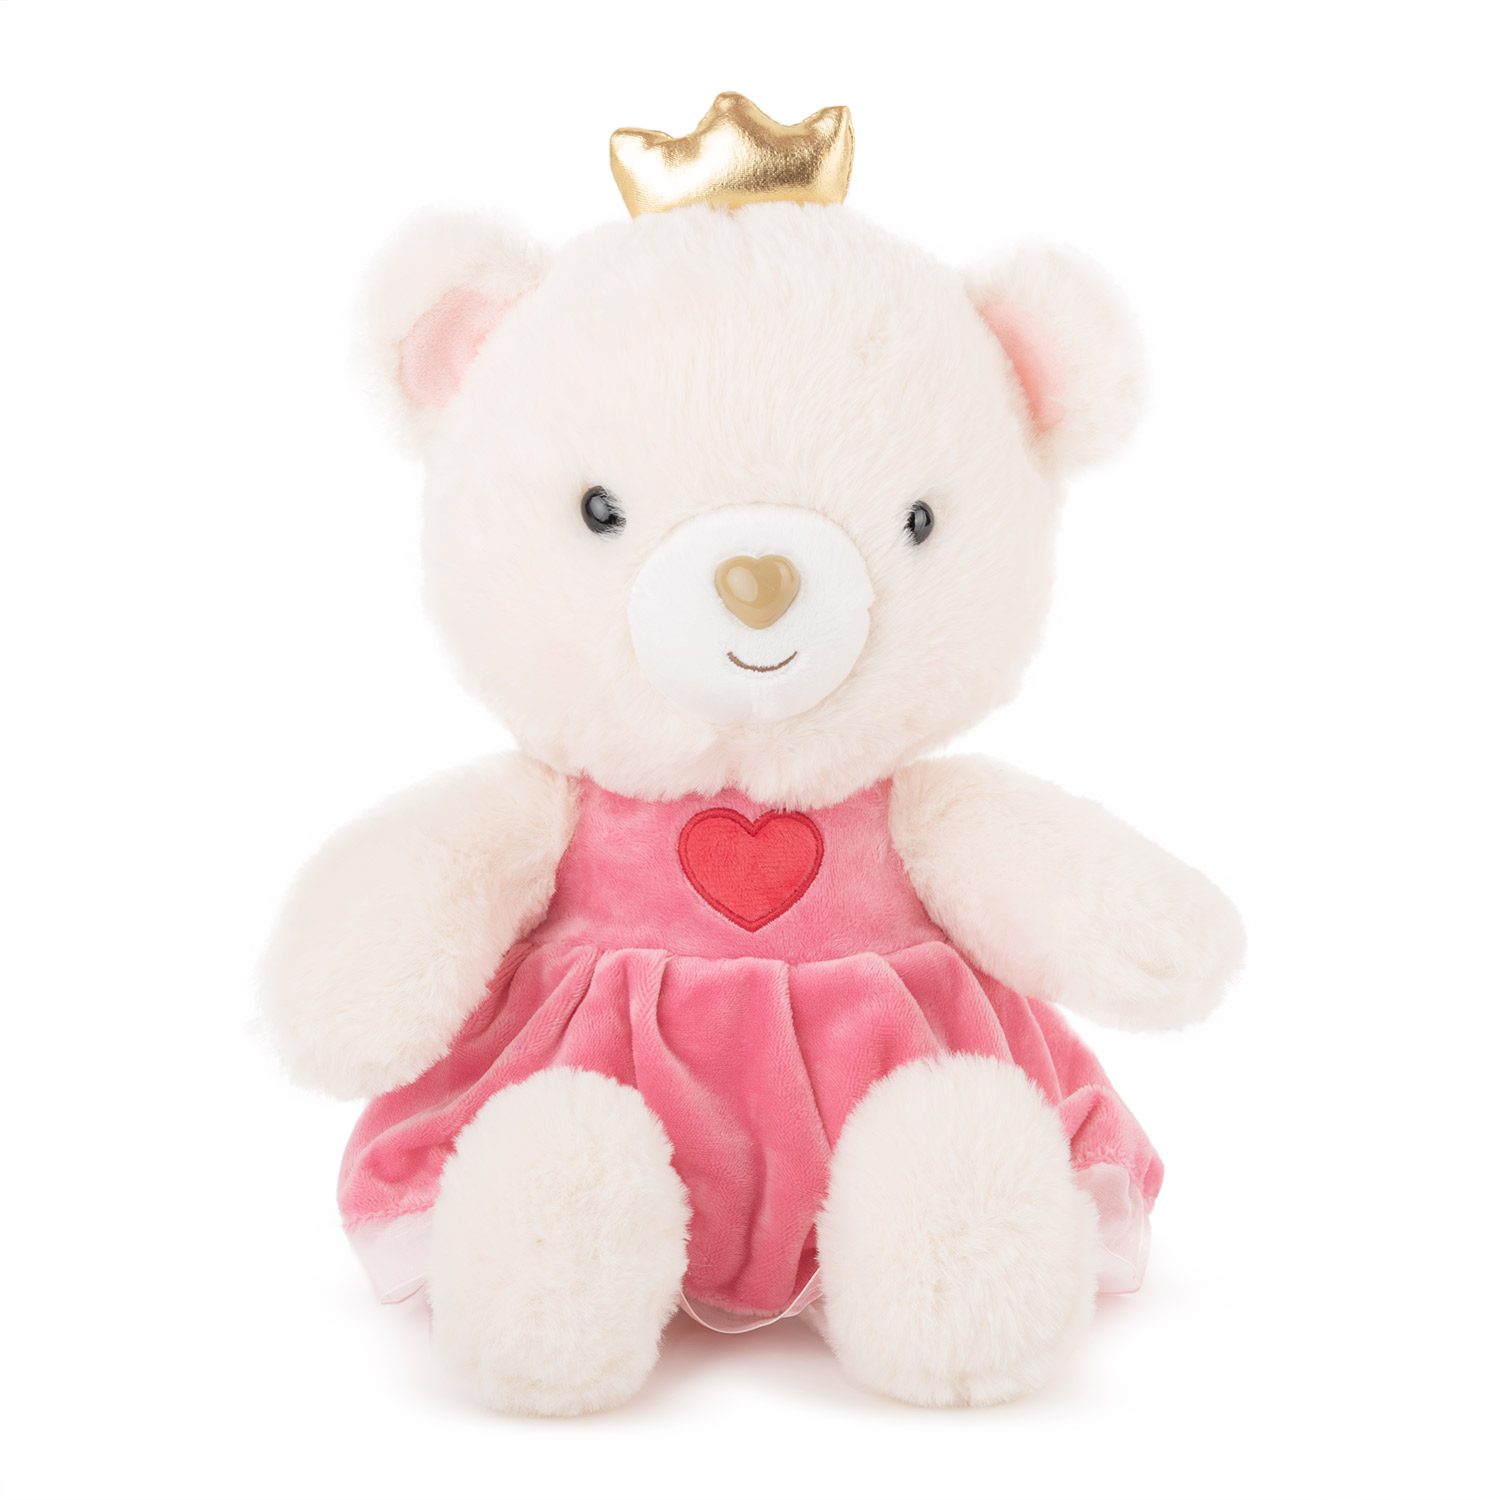 Bear with dress and crown